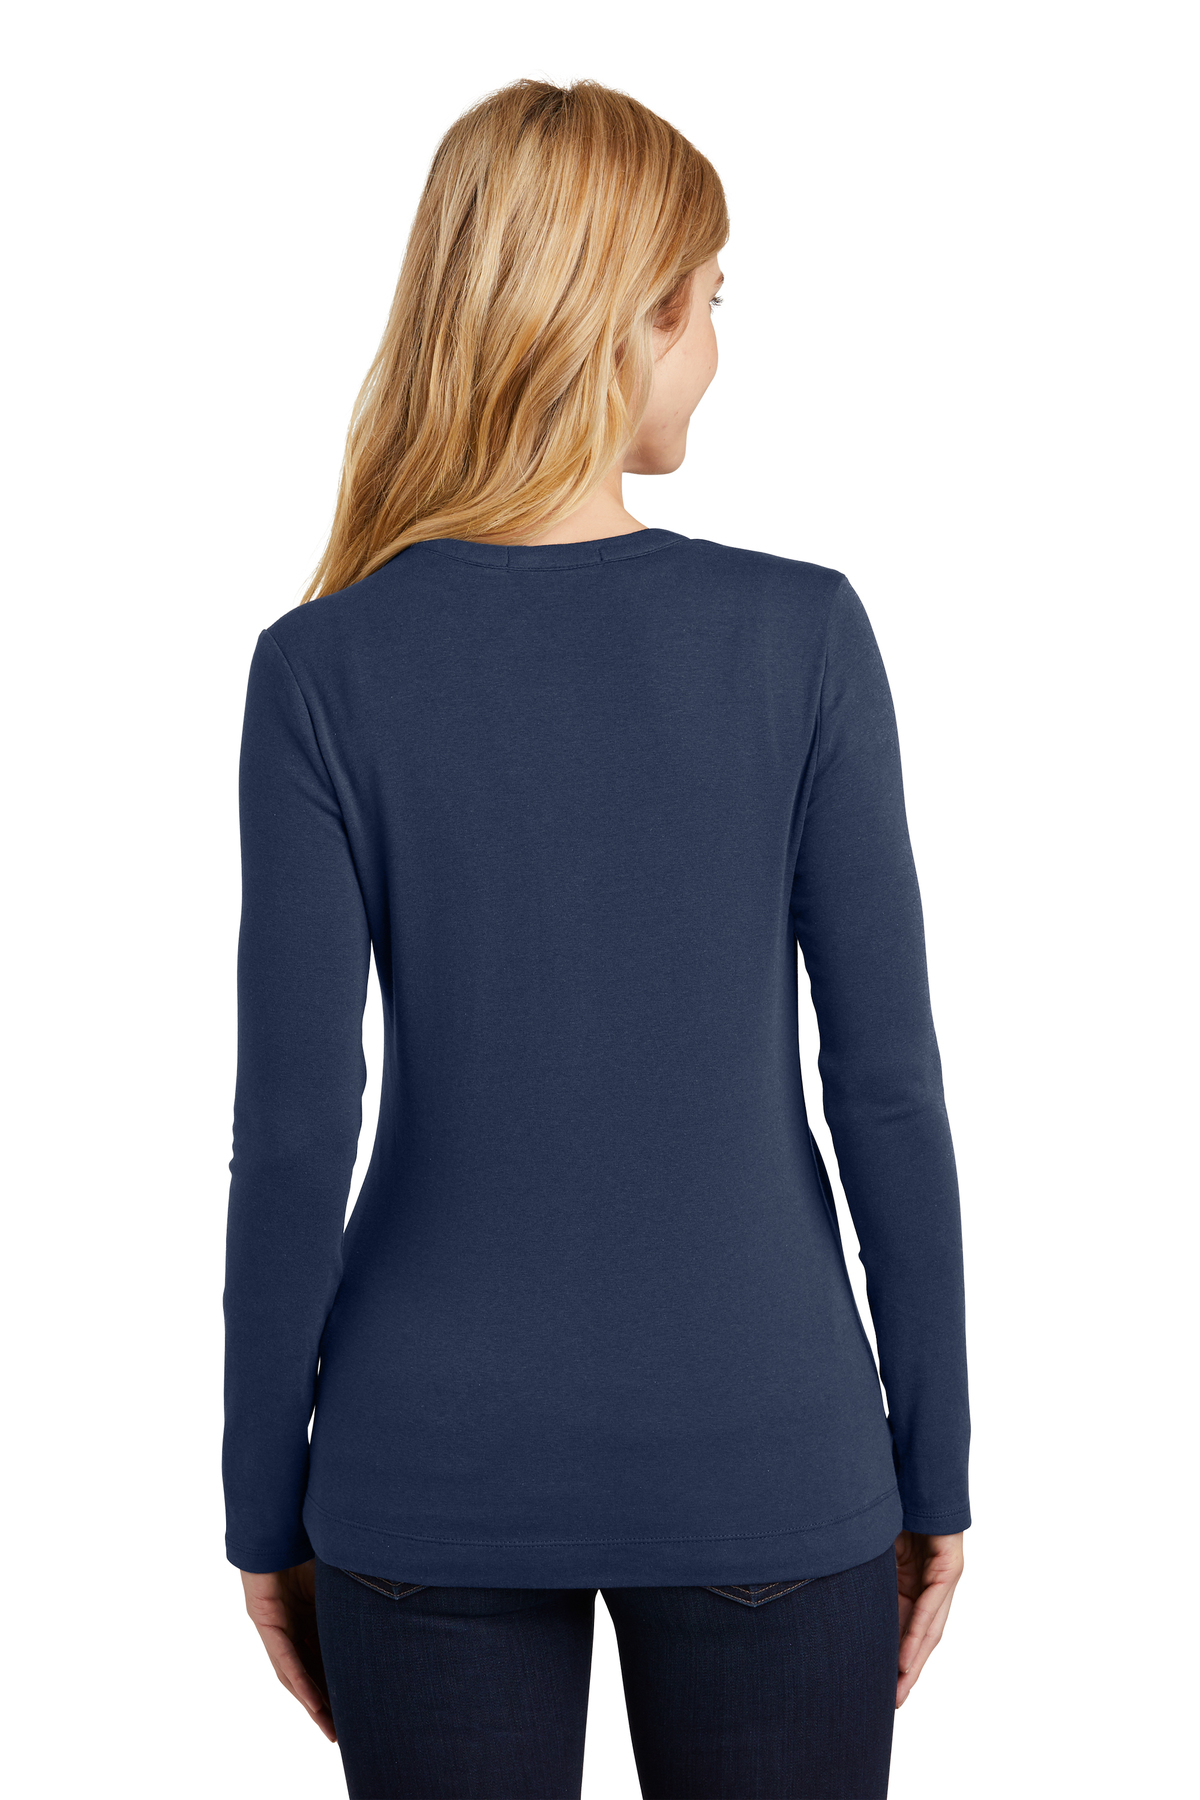 Port Authority Ladies Concept Stretch Button-Front Cardigan | Product |  Port Authority